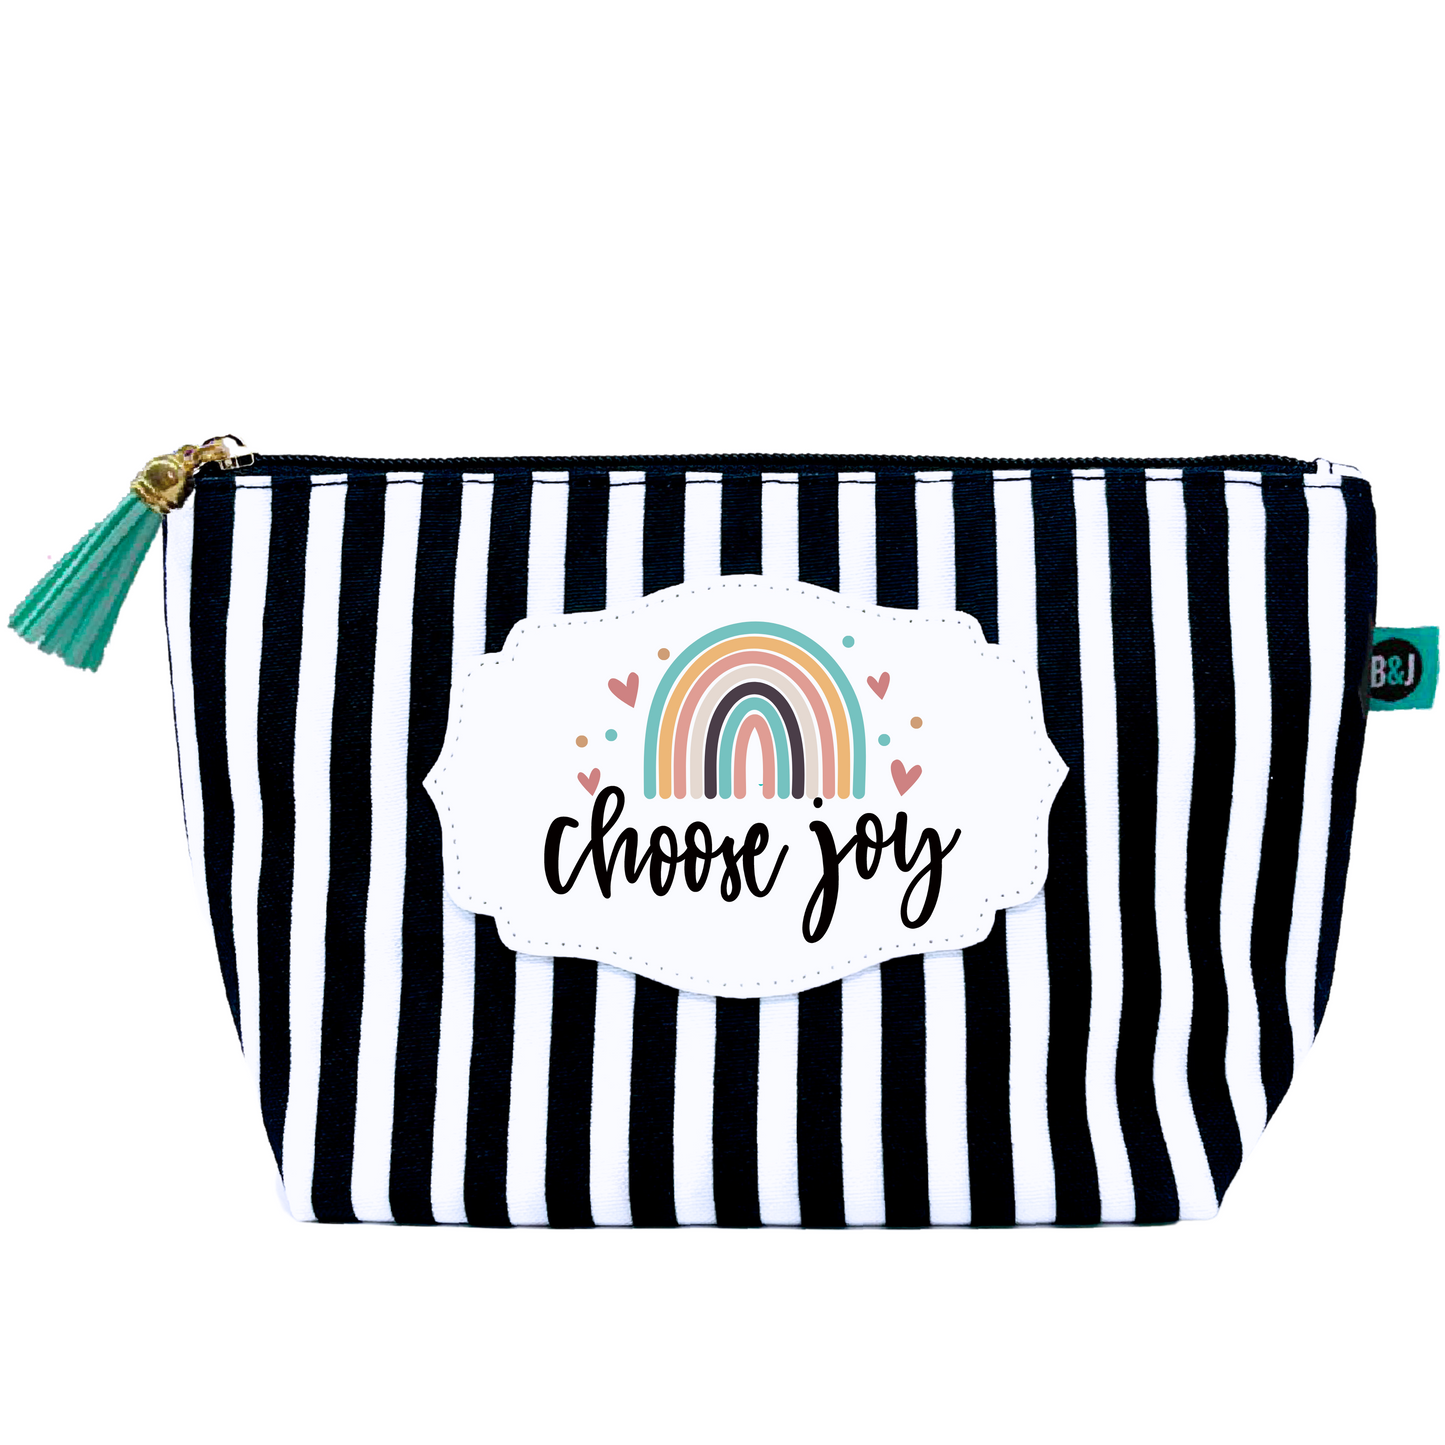 Choose Joy Janie Pouch Gifts for Women Striped Makeup Bags Cosmetic Bag Travel Toiletry Makeup Pouch Pencil Bag with Zipper Best Inspirational Birthday Just Because Gifts